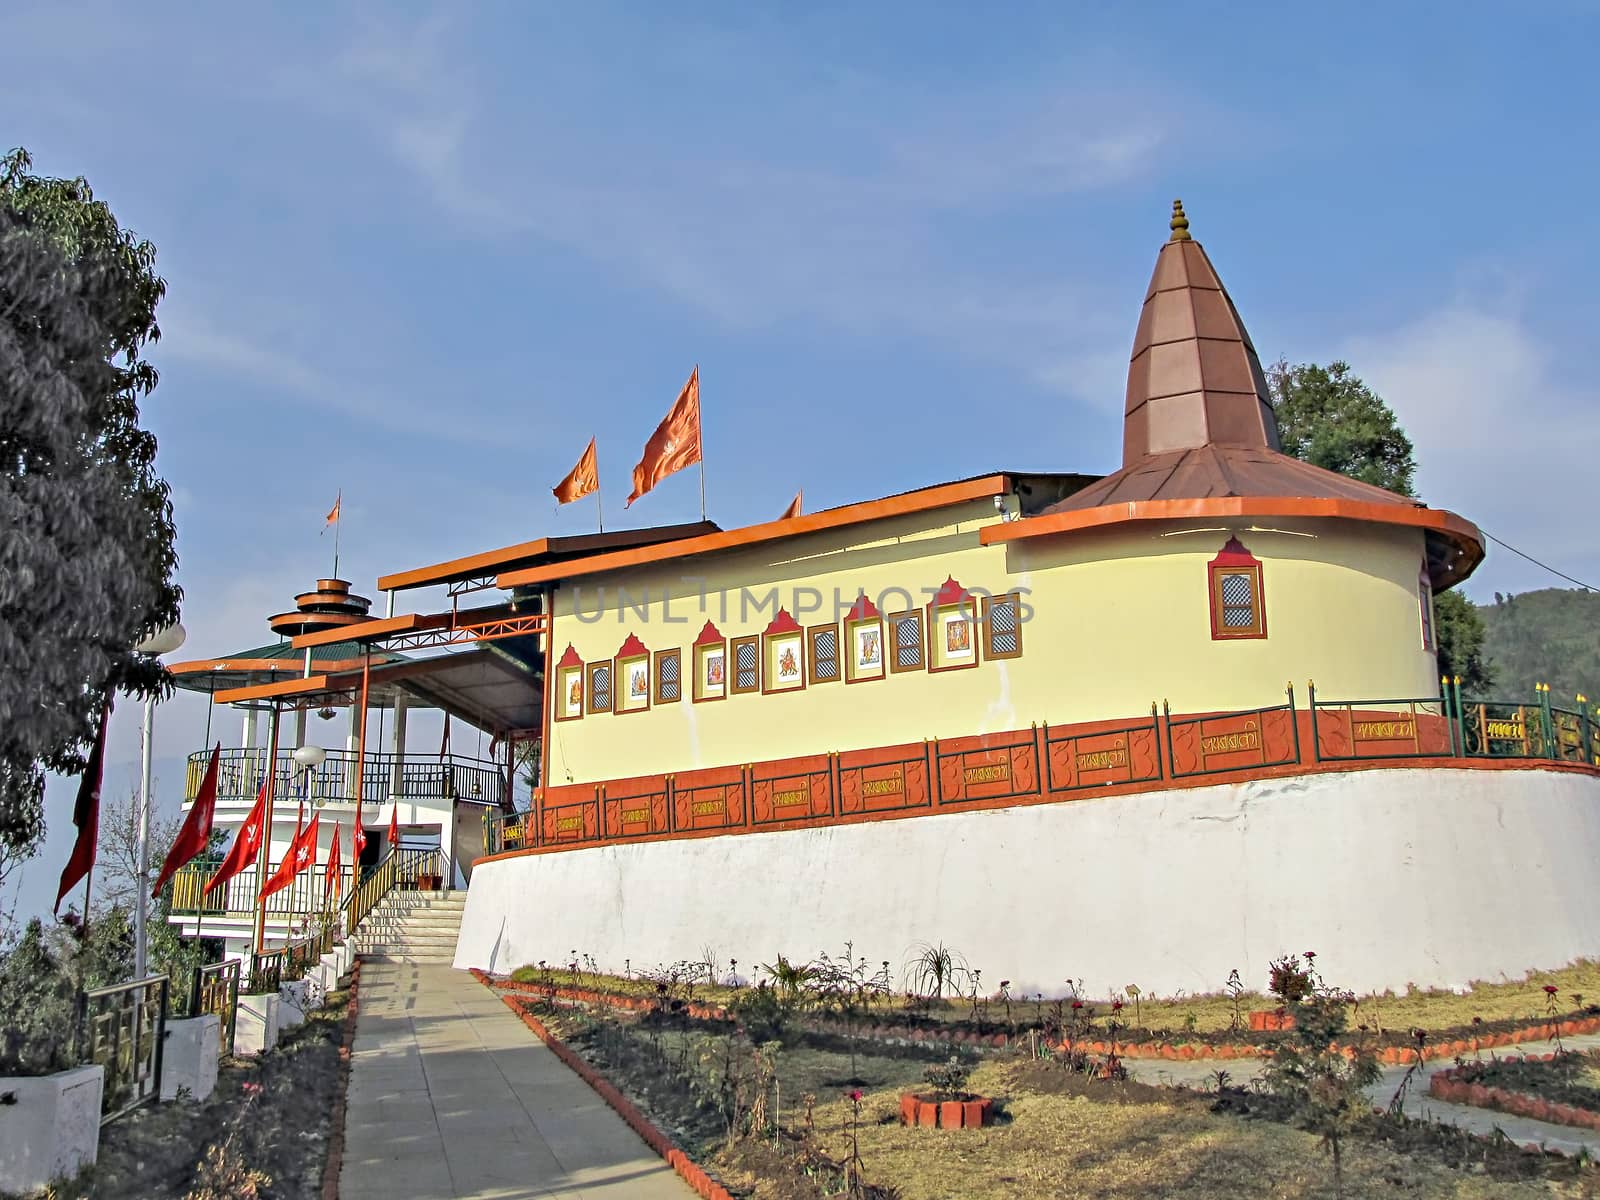 Hanuman Tok is a Hindu temple of God Hanumana which is located in the upper reaches of Gangtok, the capital of the Indian state of Sikkim.